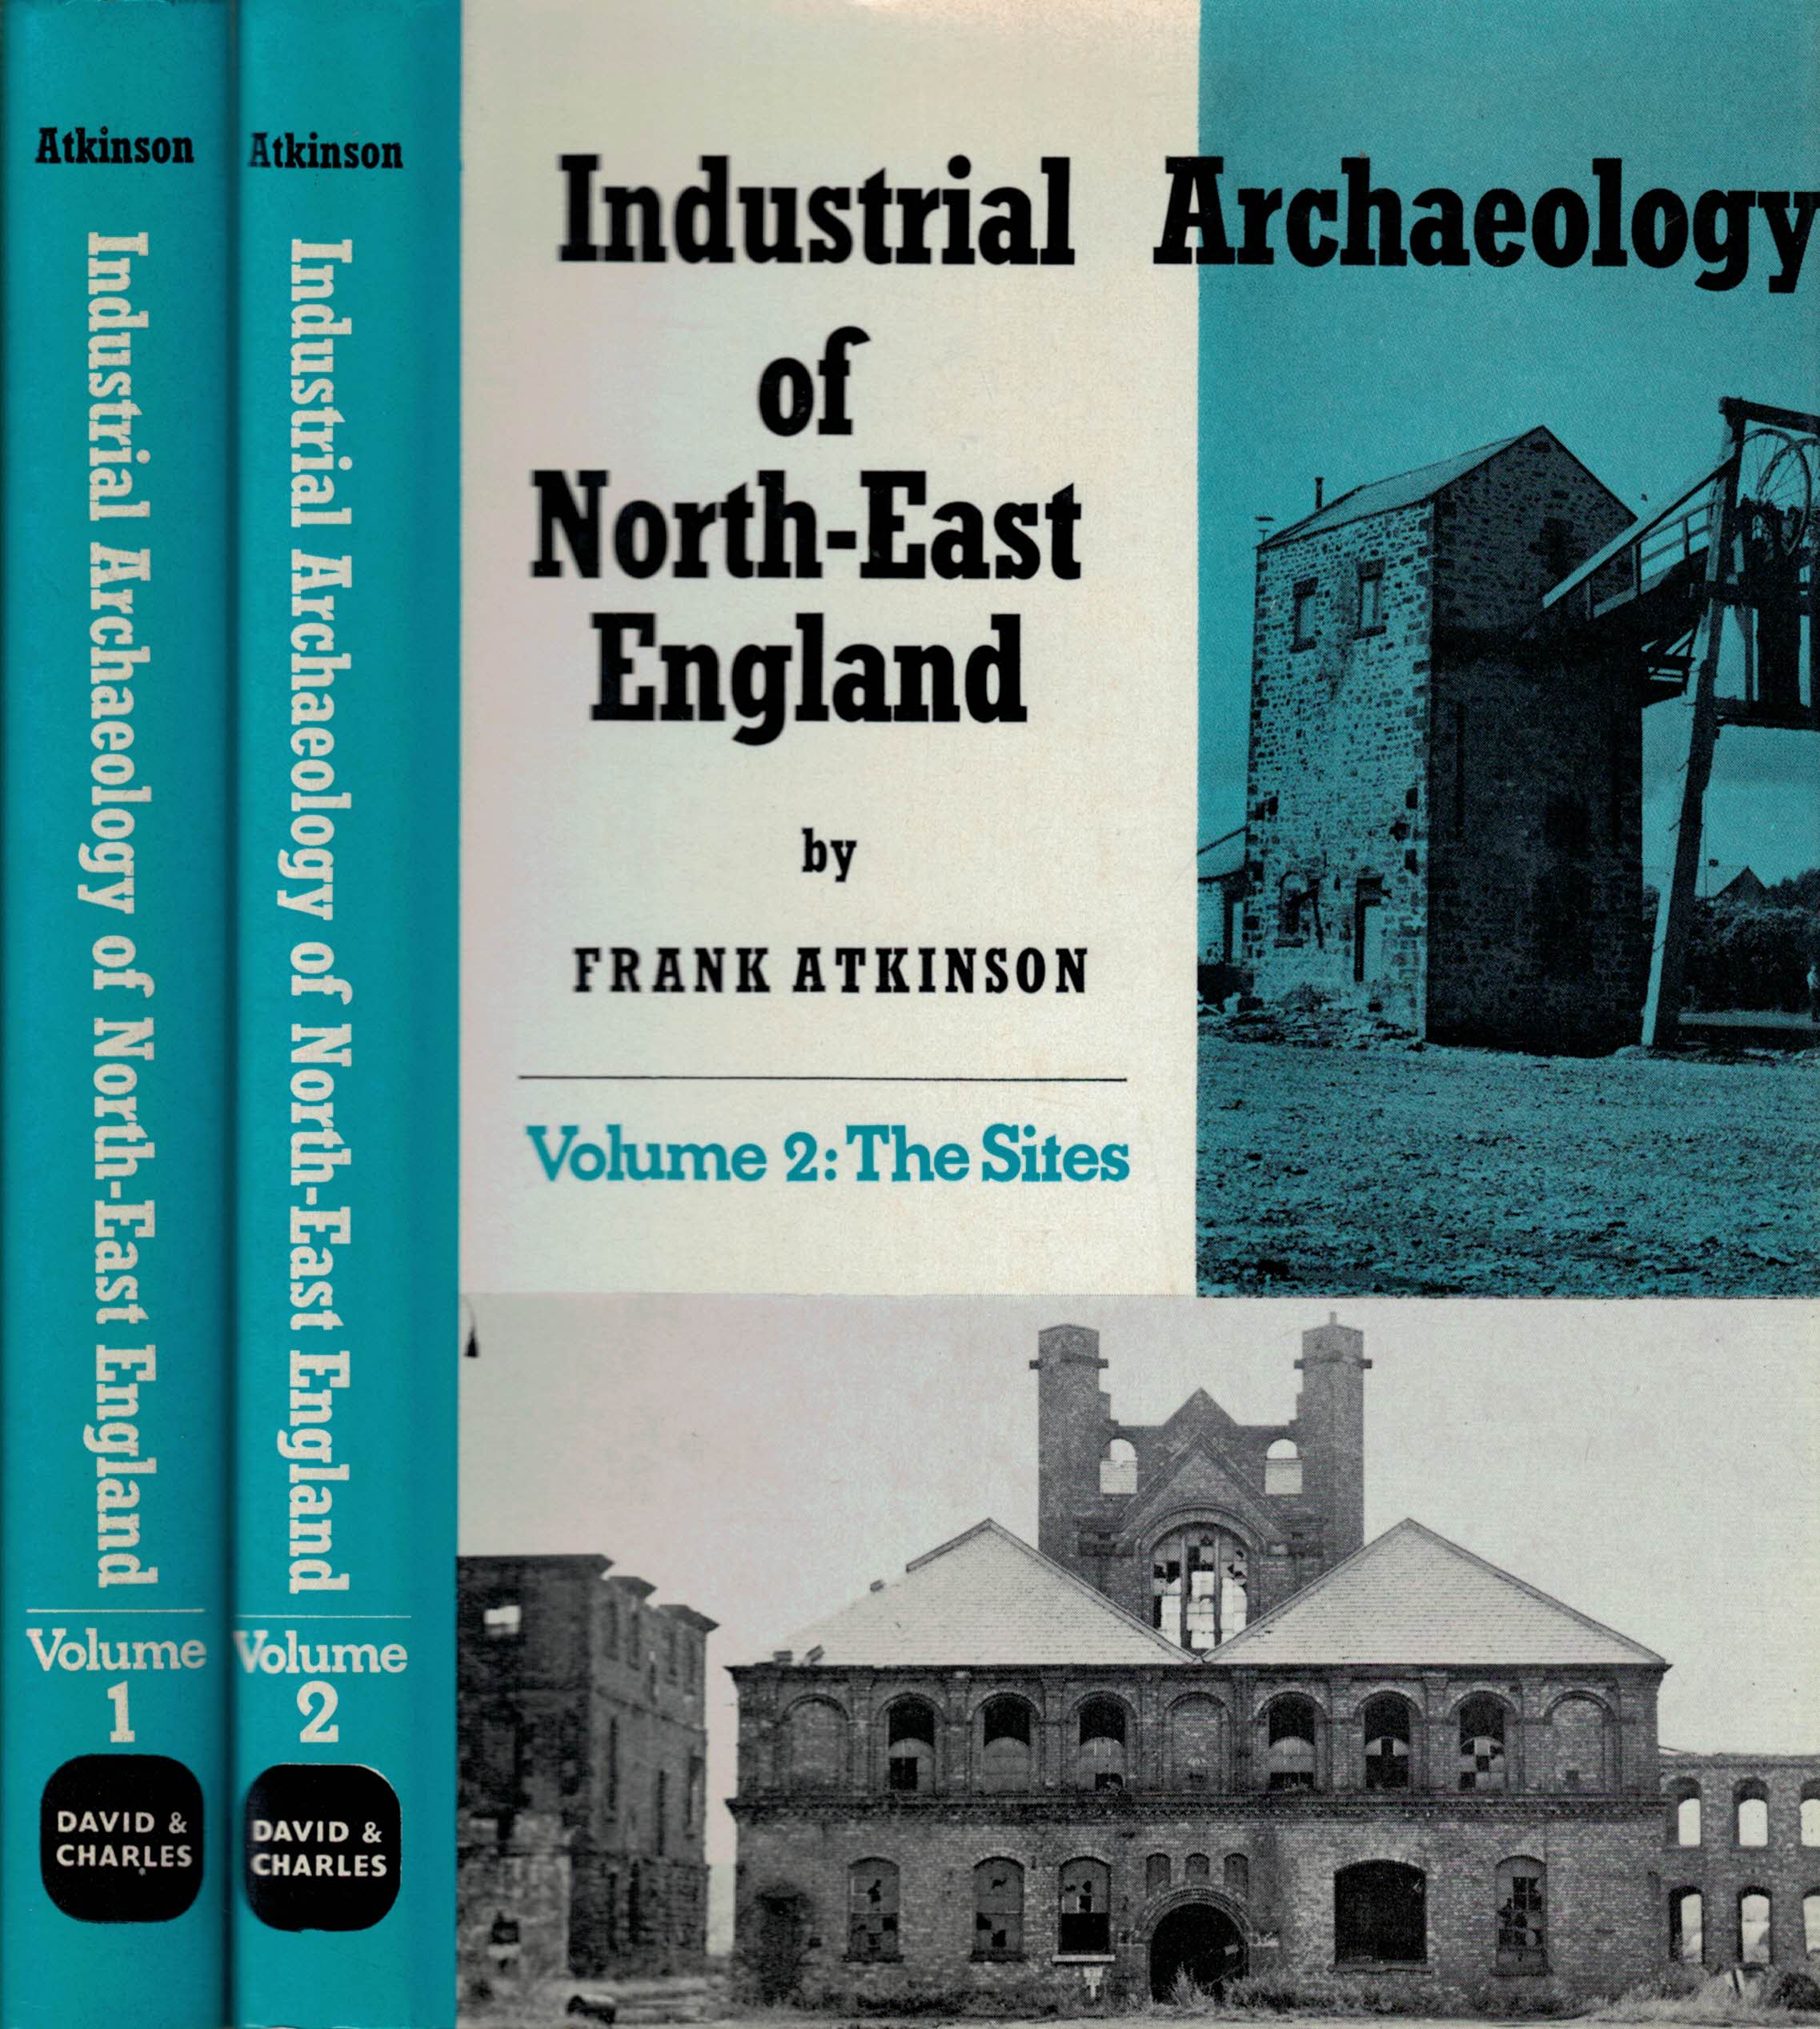 Industrial Archaeology of North-East England. 2 volume set.